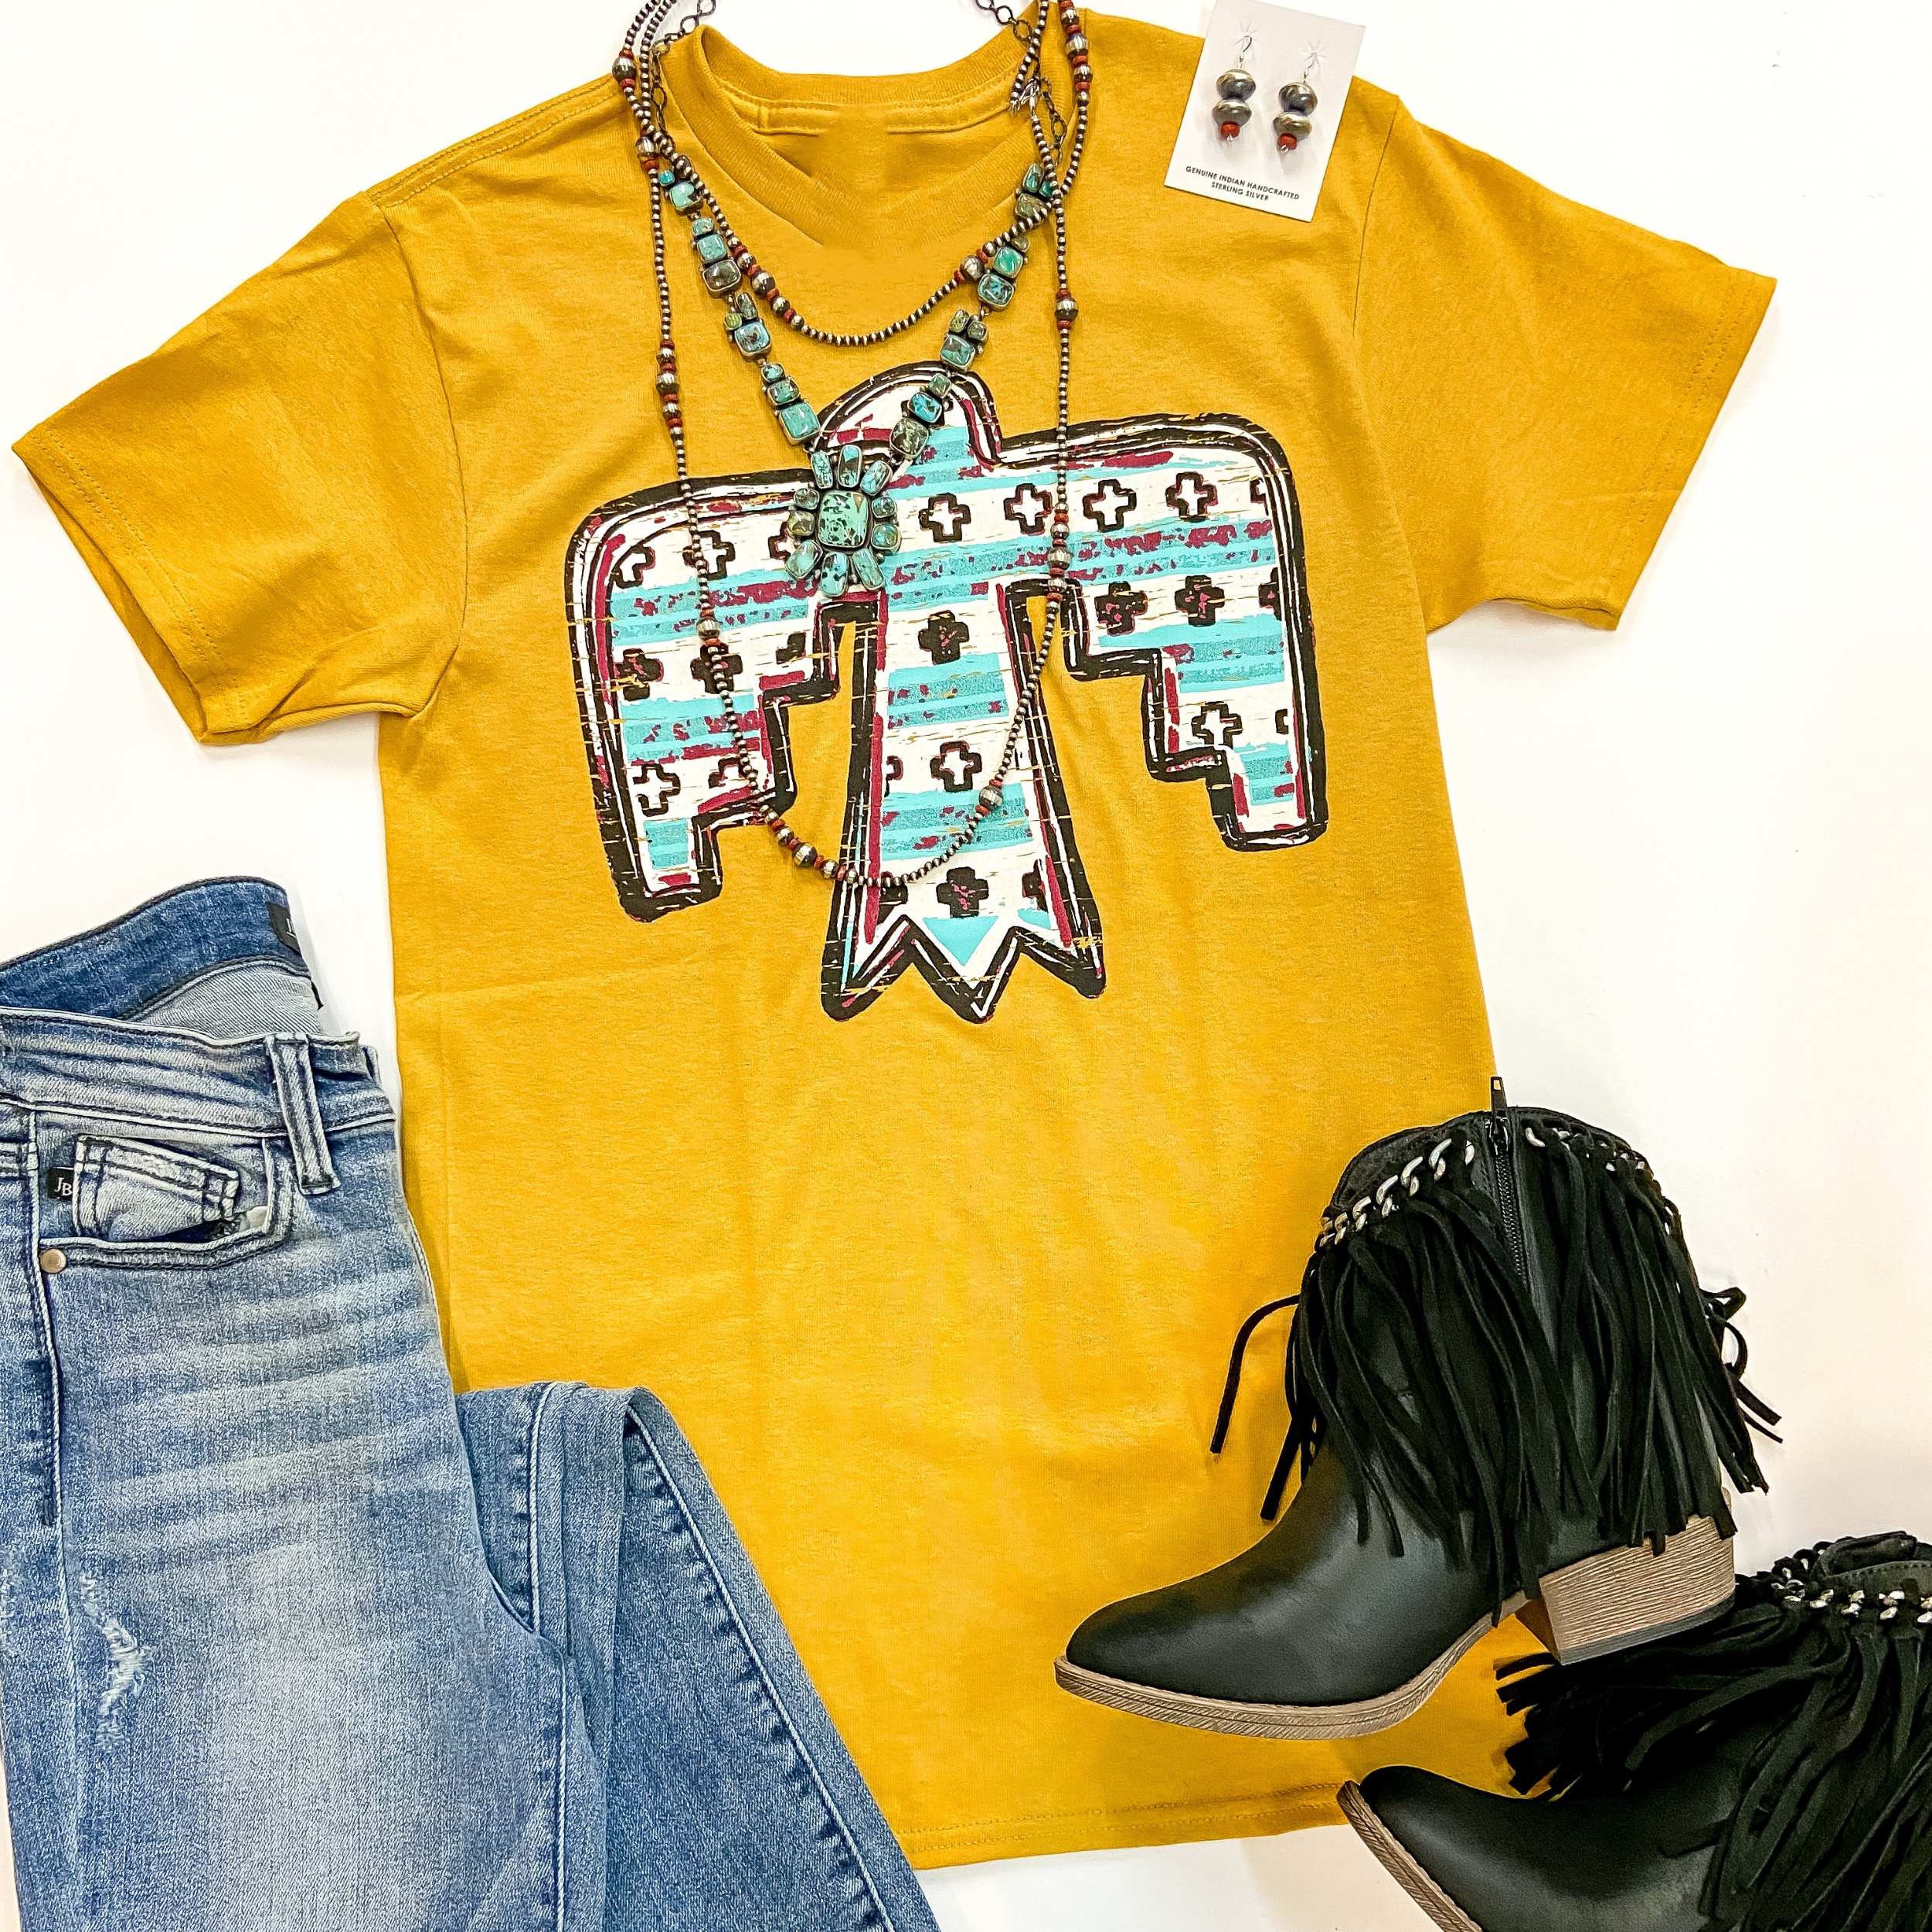 A mustard yellow short sleeve tee shirt with a crew neckline and a graphic of a thunderbird with ivory, turquoise, and red tribal print on the thunderbird. This tee is pictured with denim jeans, black booties, and genuine turquoise and sterling silver jewelry.